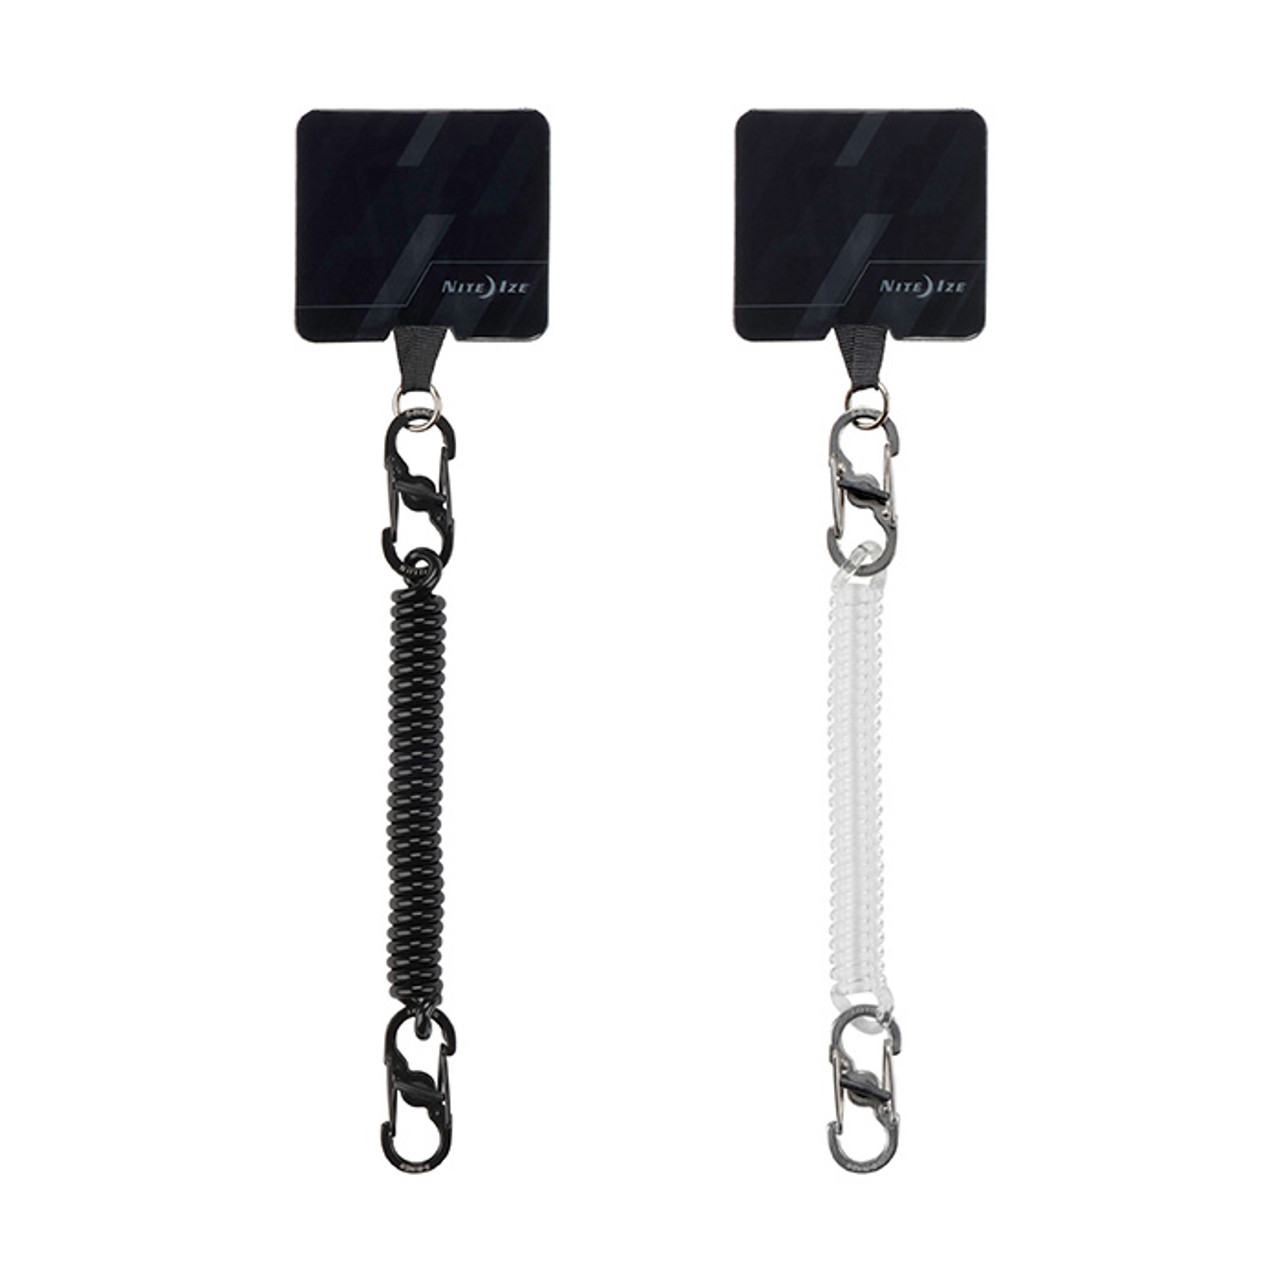 Nite Ize Hitch- Phone Anchor + Tether